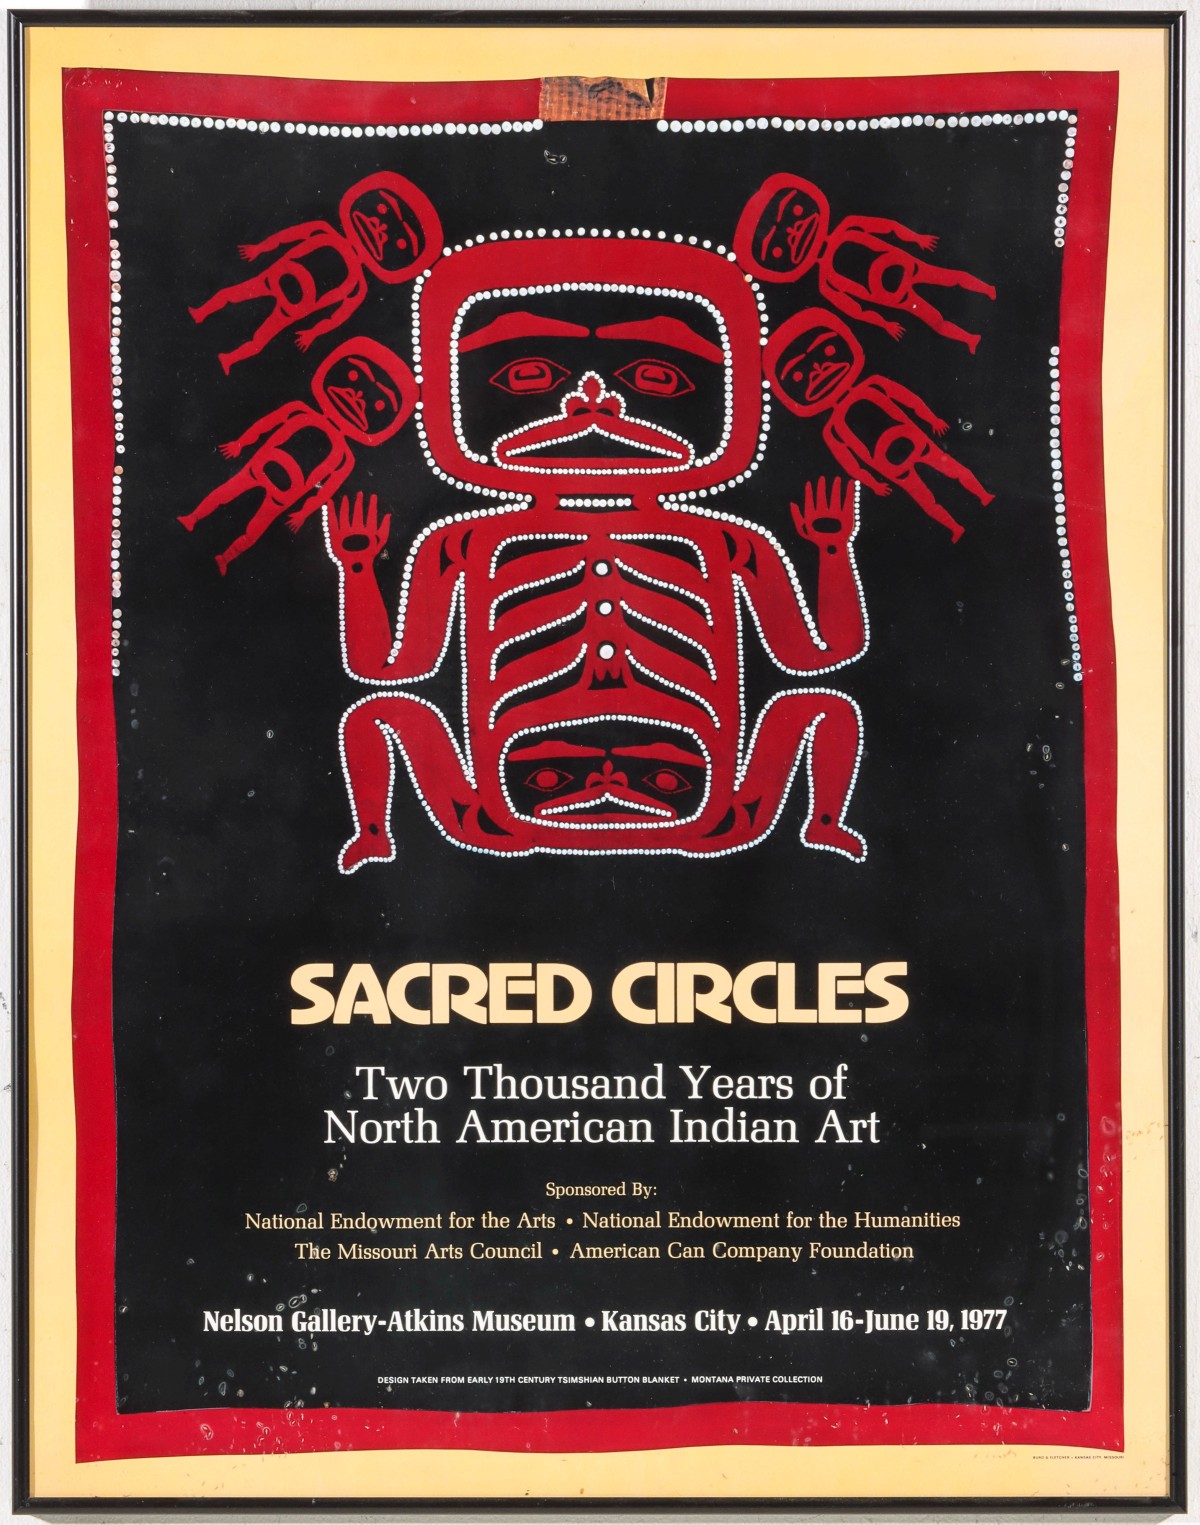 A 1977 POSTER FOR THE SACRED CIRCLES EXHIBITION